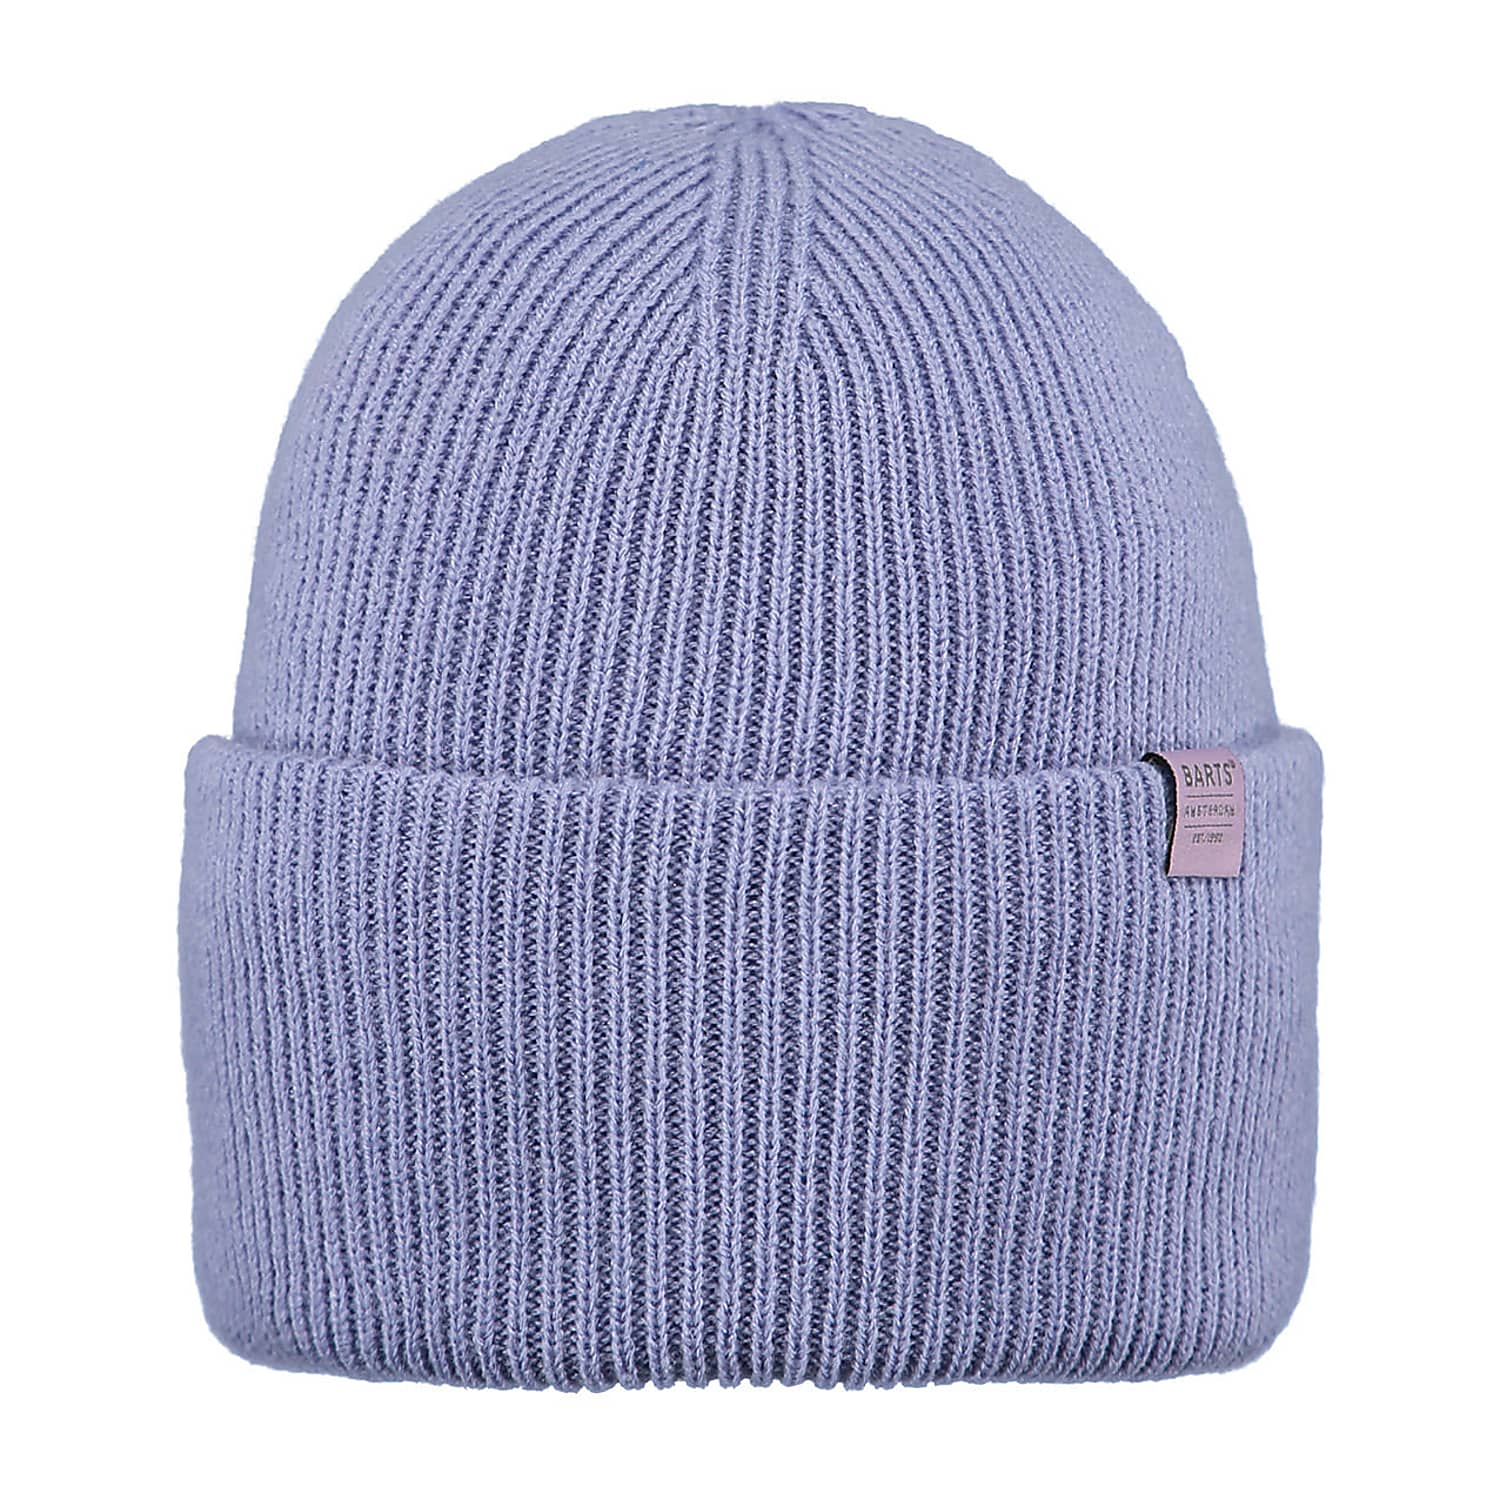 Barts HAVENO BEANIE, Berry II - Fast and cheap shipping